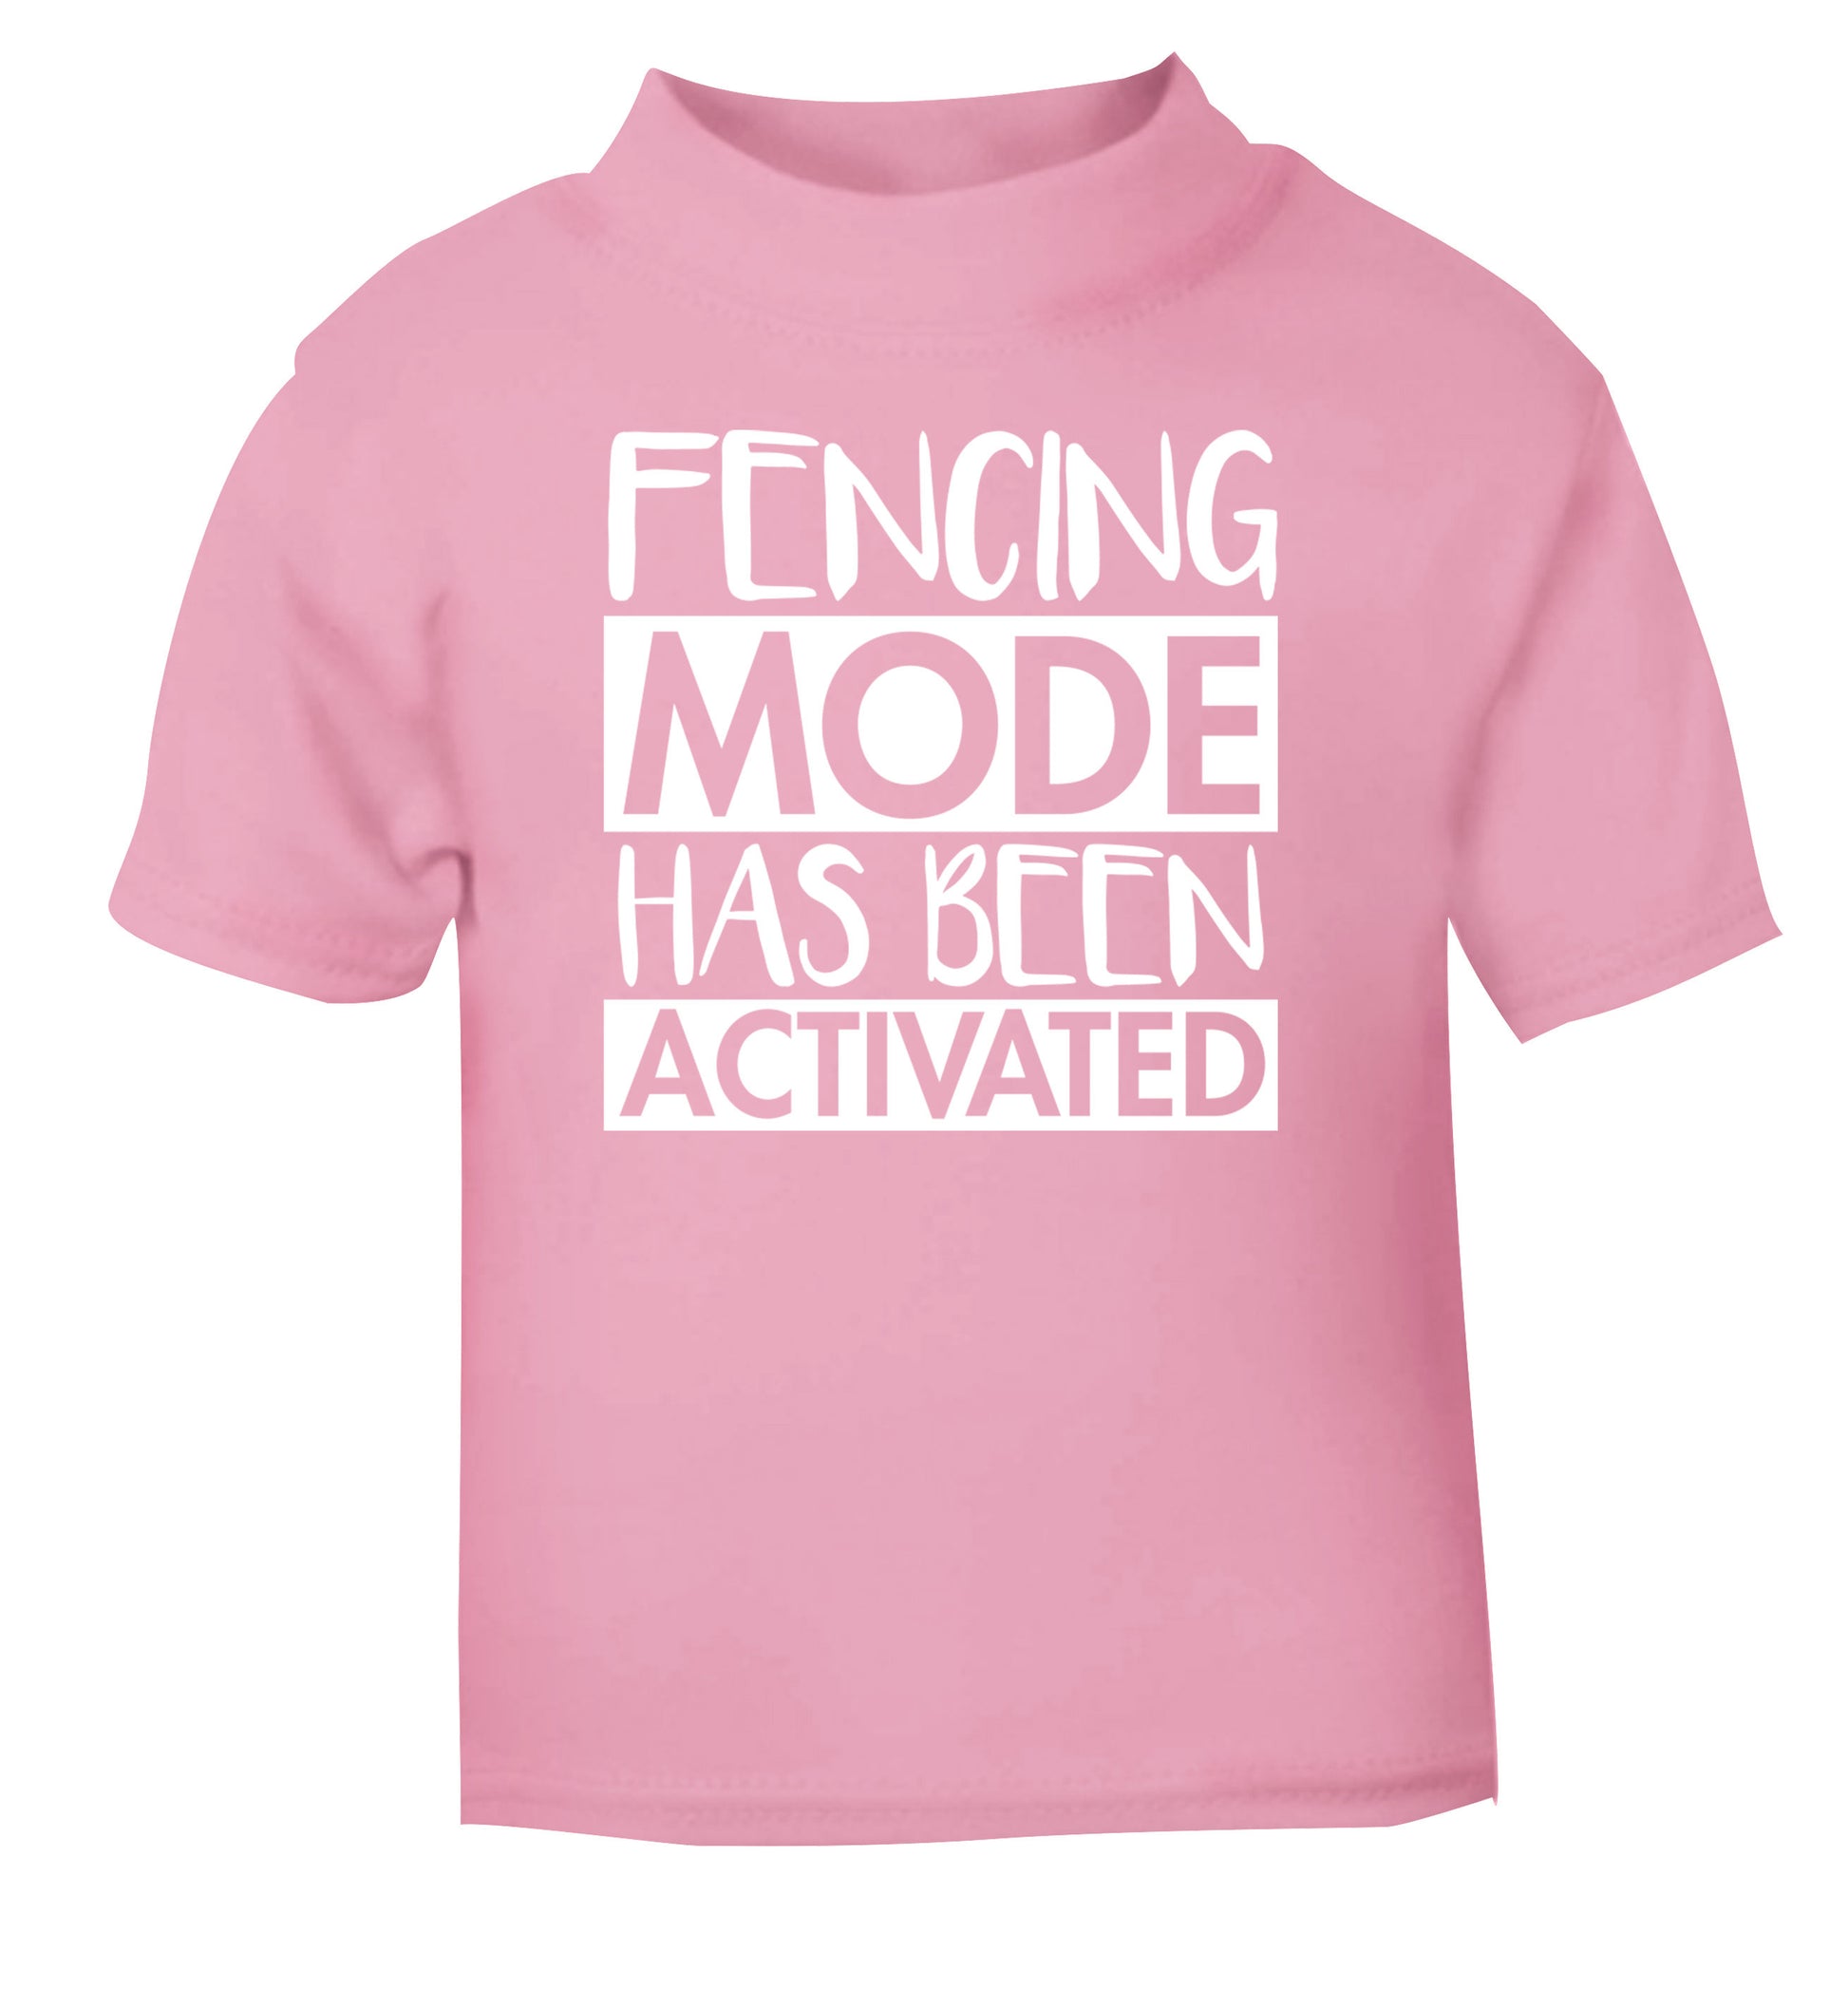 Fencing mode activated light pink Baby Toddler Tshirt 2 Years